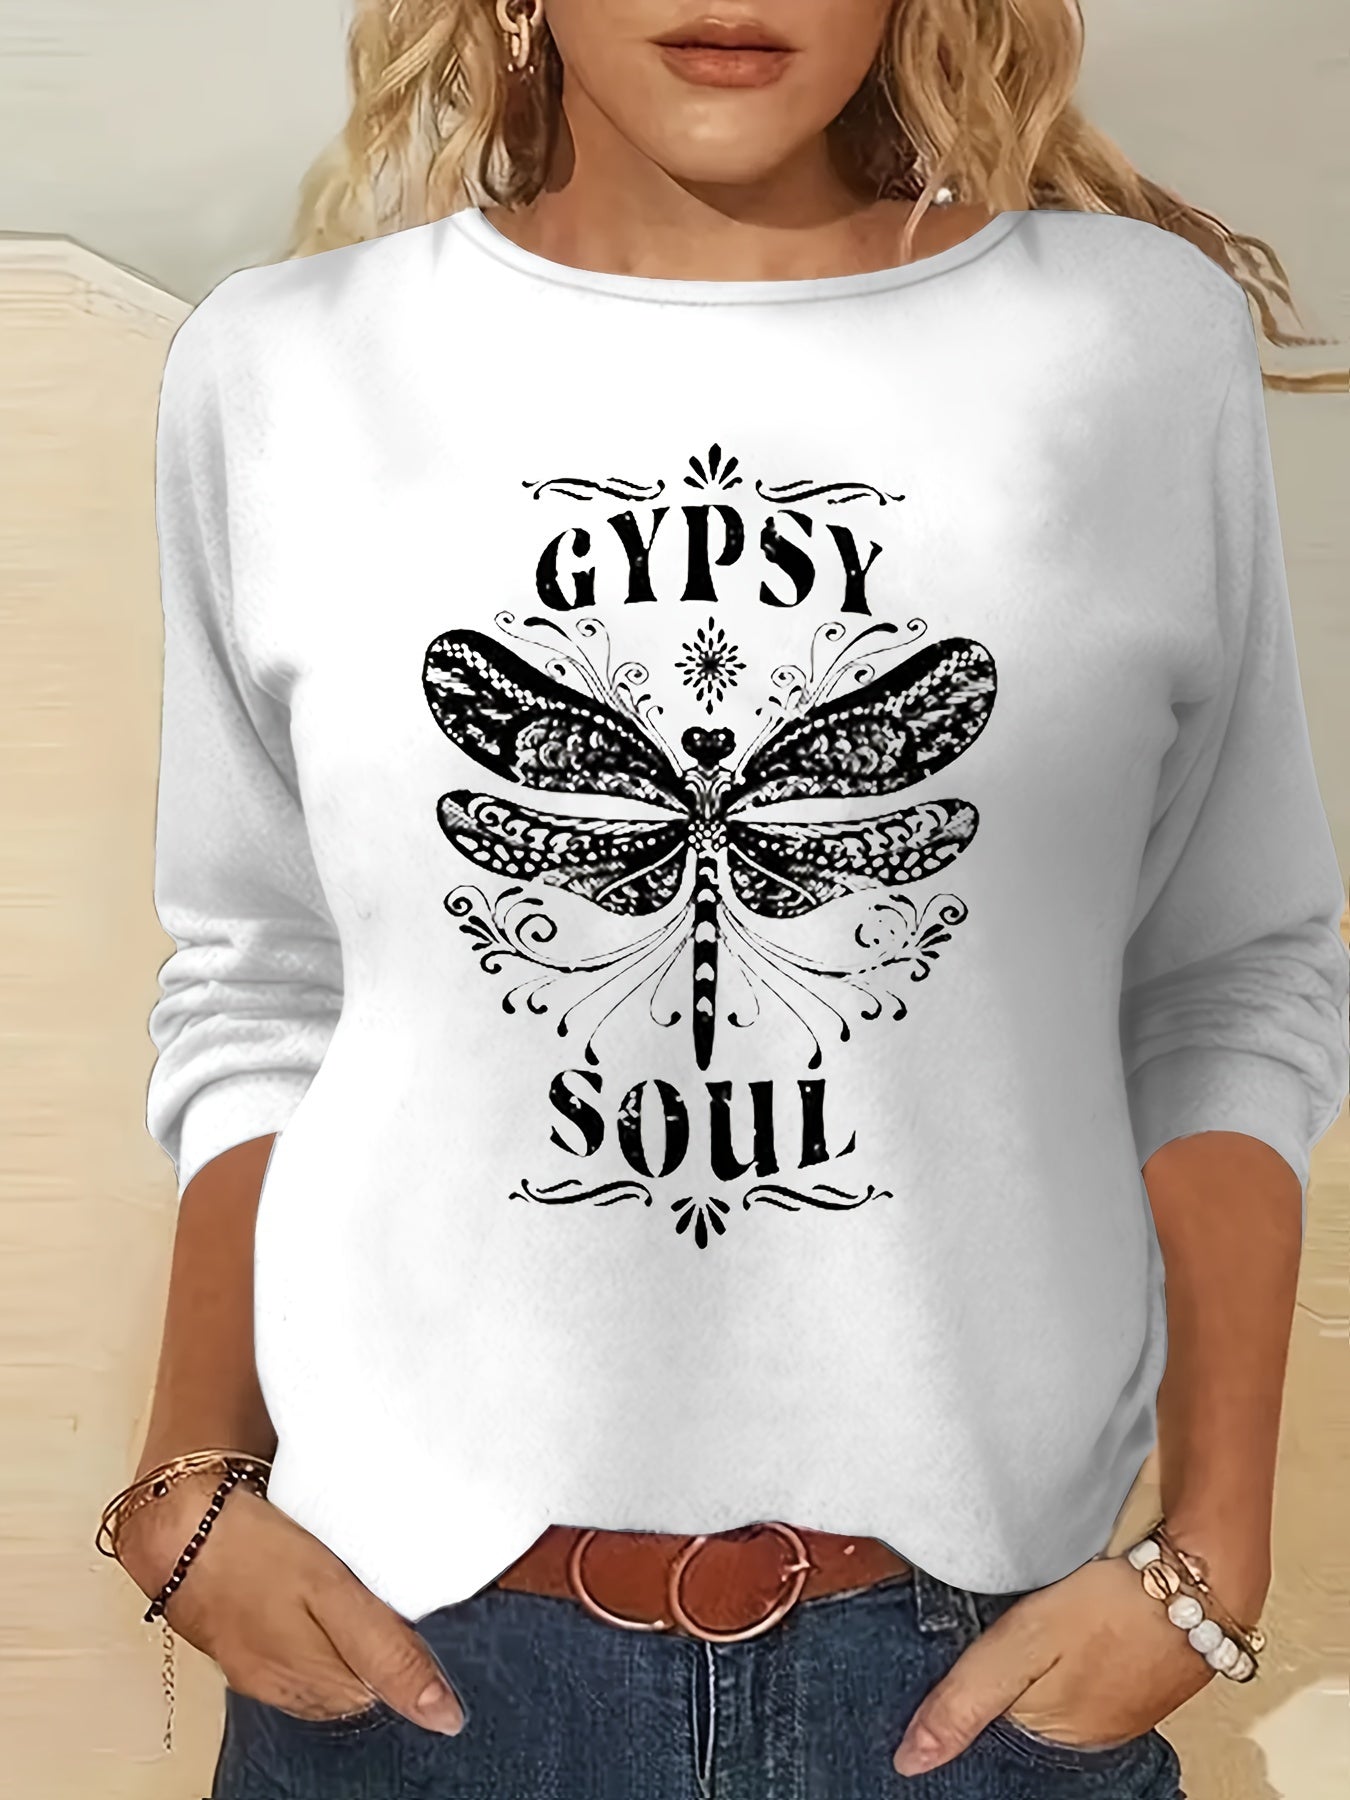 Gypsy Soul Print Long Sleeve T-Shirt, Crew Neck Casual Top